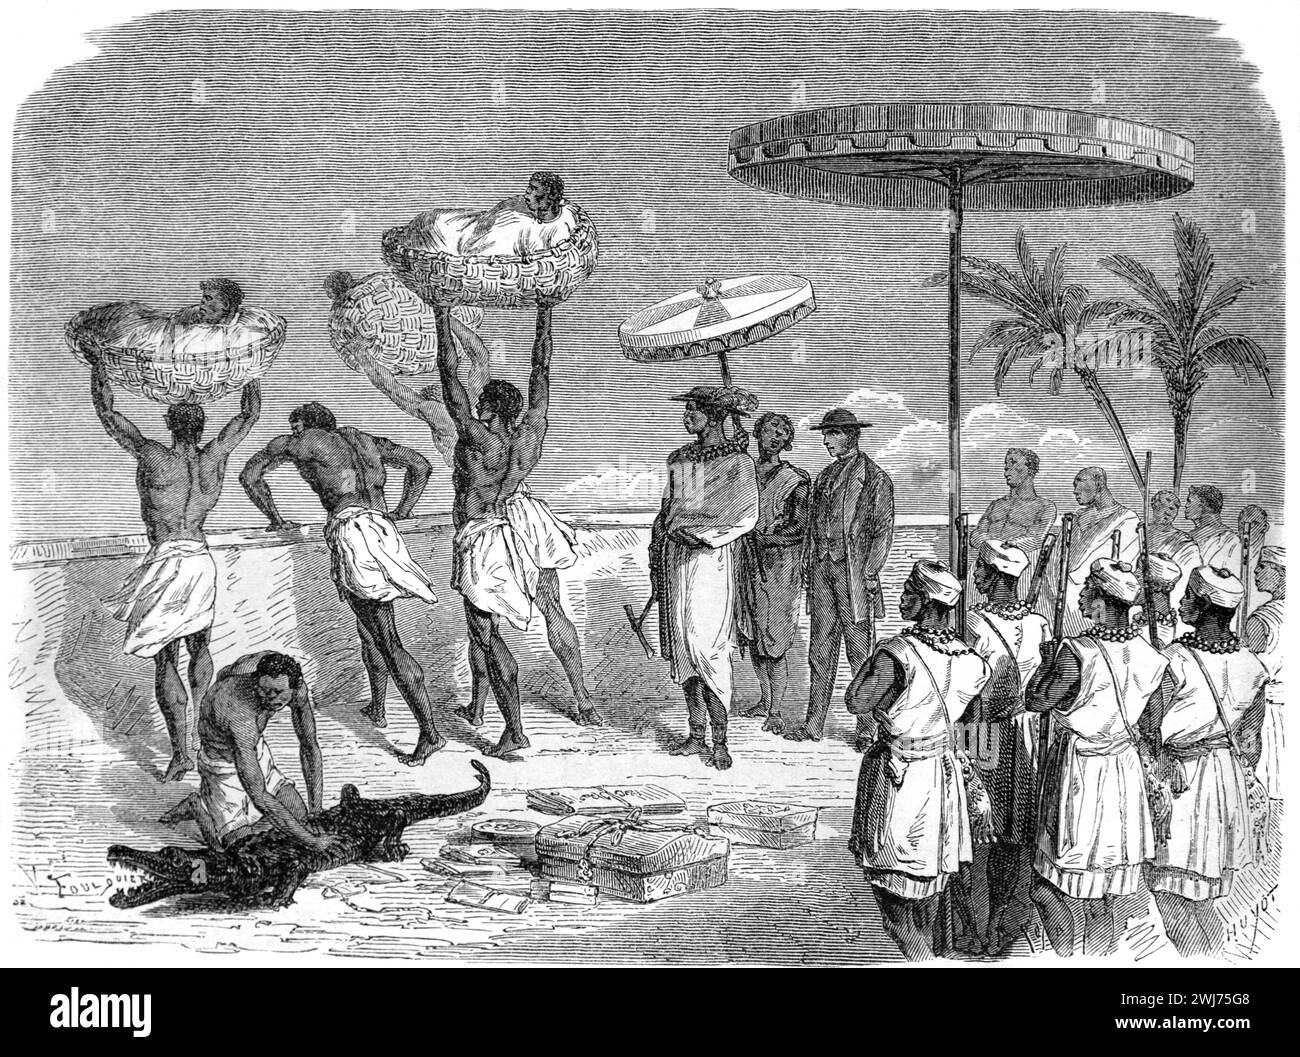 Human Sacrifice where Victims from Rival Tribes were Thrown to Dahomey People from the Royal Palaces of Abomey of the Kingdom of Dahomey, now Benin, West Africa. Vintage or Historic Engraving or Illustration 1863. An eye witness reported, on 29 July 1862, of the custom in the King's Palace (of King Ghezo),of  throwing victims from two raised platforms. Each platform held 16 captives and four horses. On a third platform were four horses, a crocodile and 16 women. The men and women had been captured in Ishaga Nigeria. Stock Photo